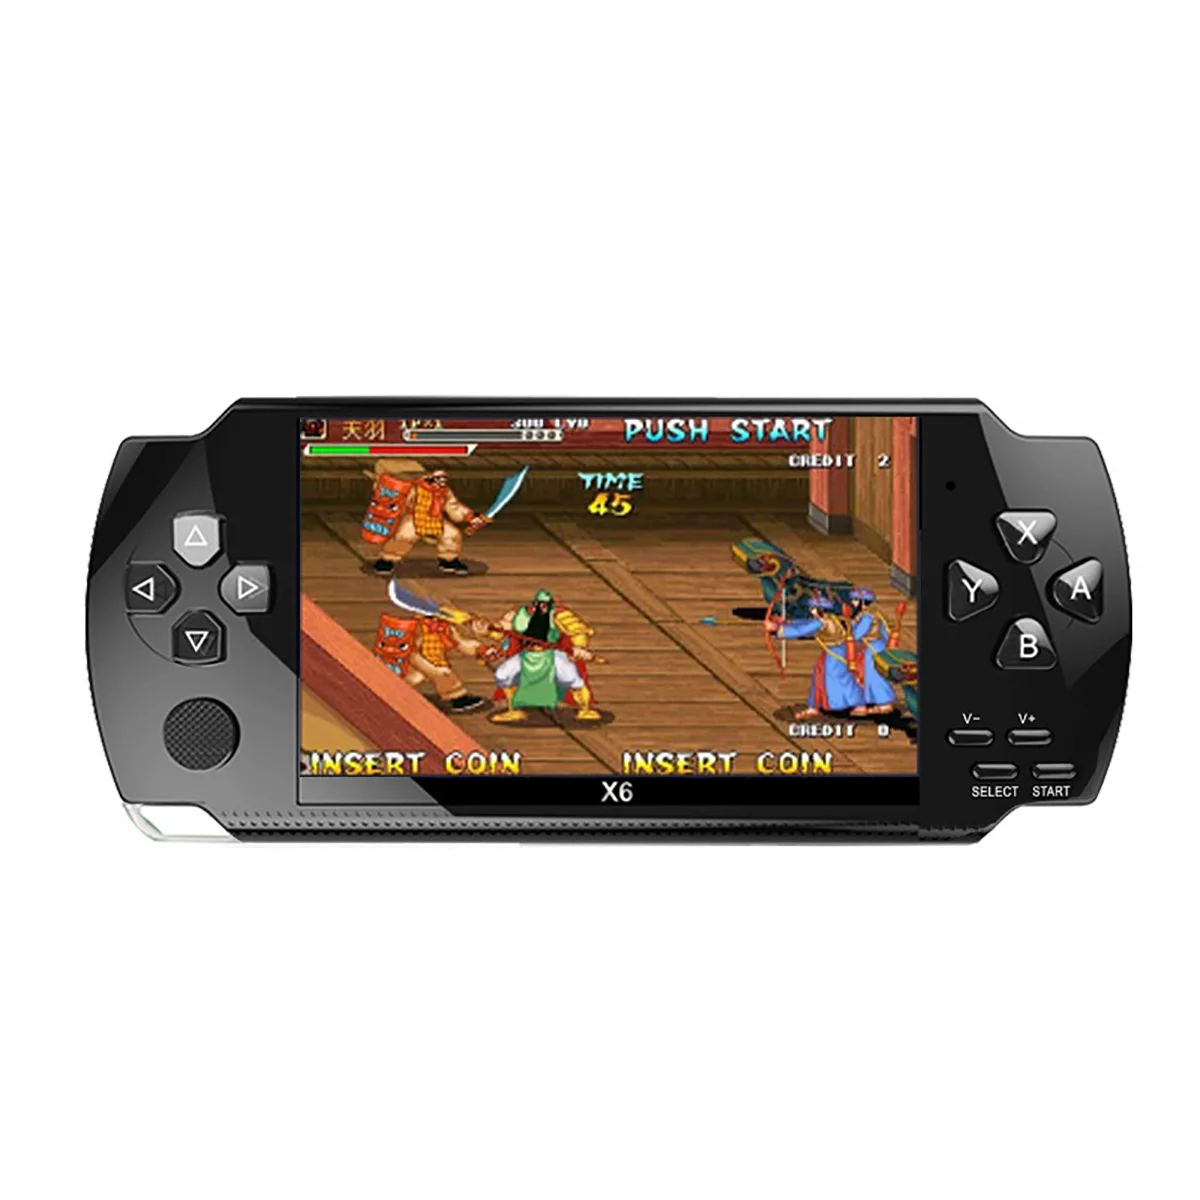 4.3 "PSP 8G ROM handheld game console player, TV output with headphones, portable handheld game console classic retro video game console with 4.1-inch HD screen - image 2 of 3